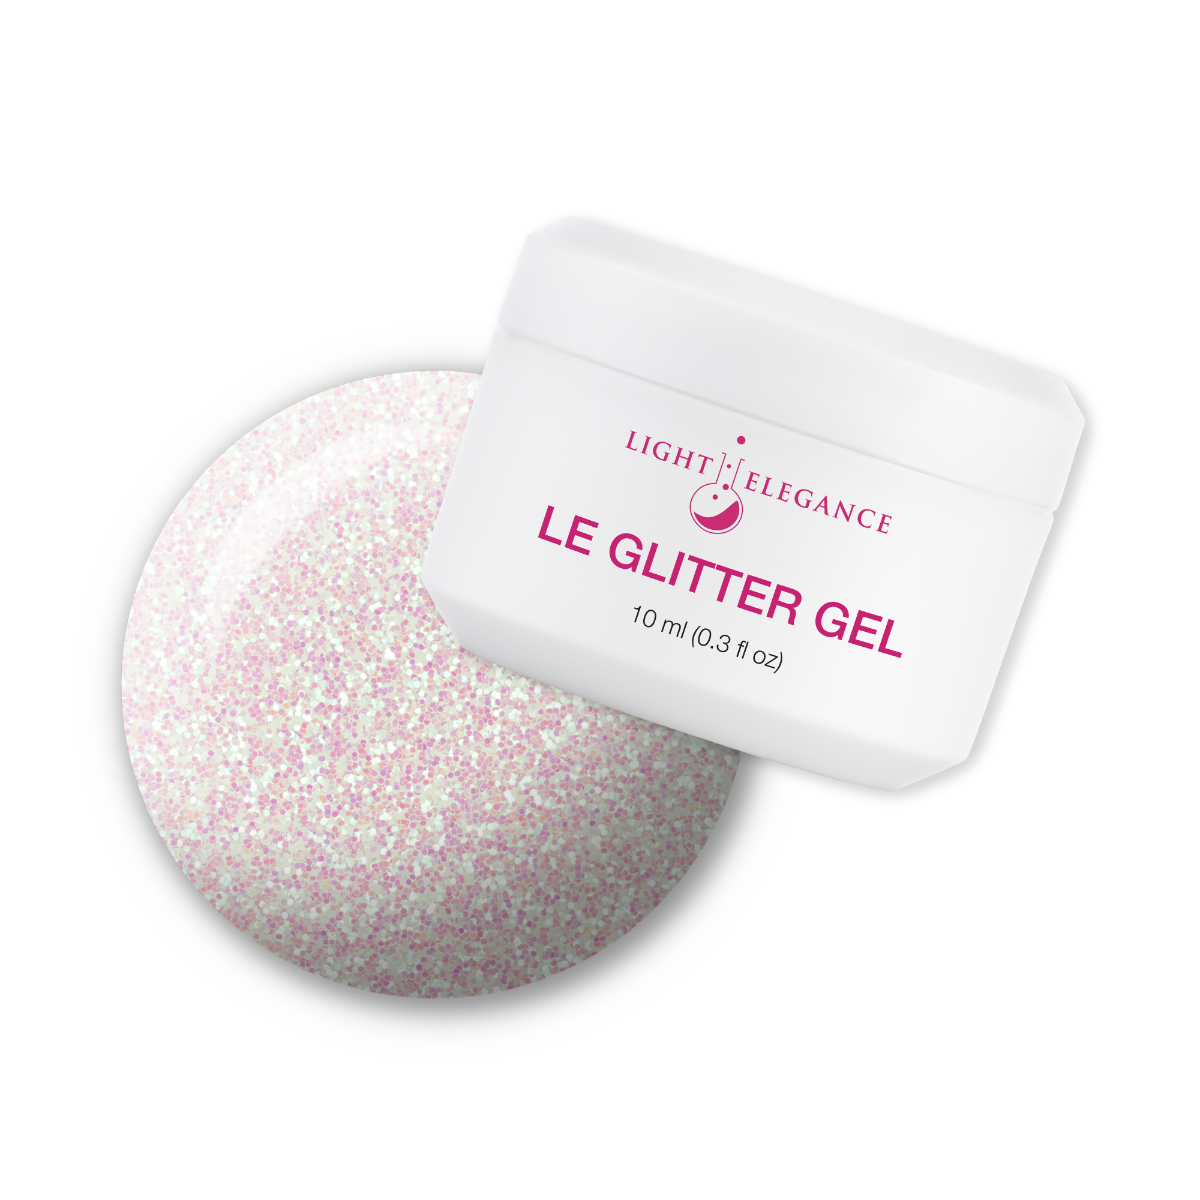 Light Elegance Glitter Gel - Space Cadet :: New Packaging - Creata Beauty - Professional Beauty Products